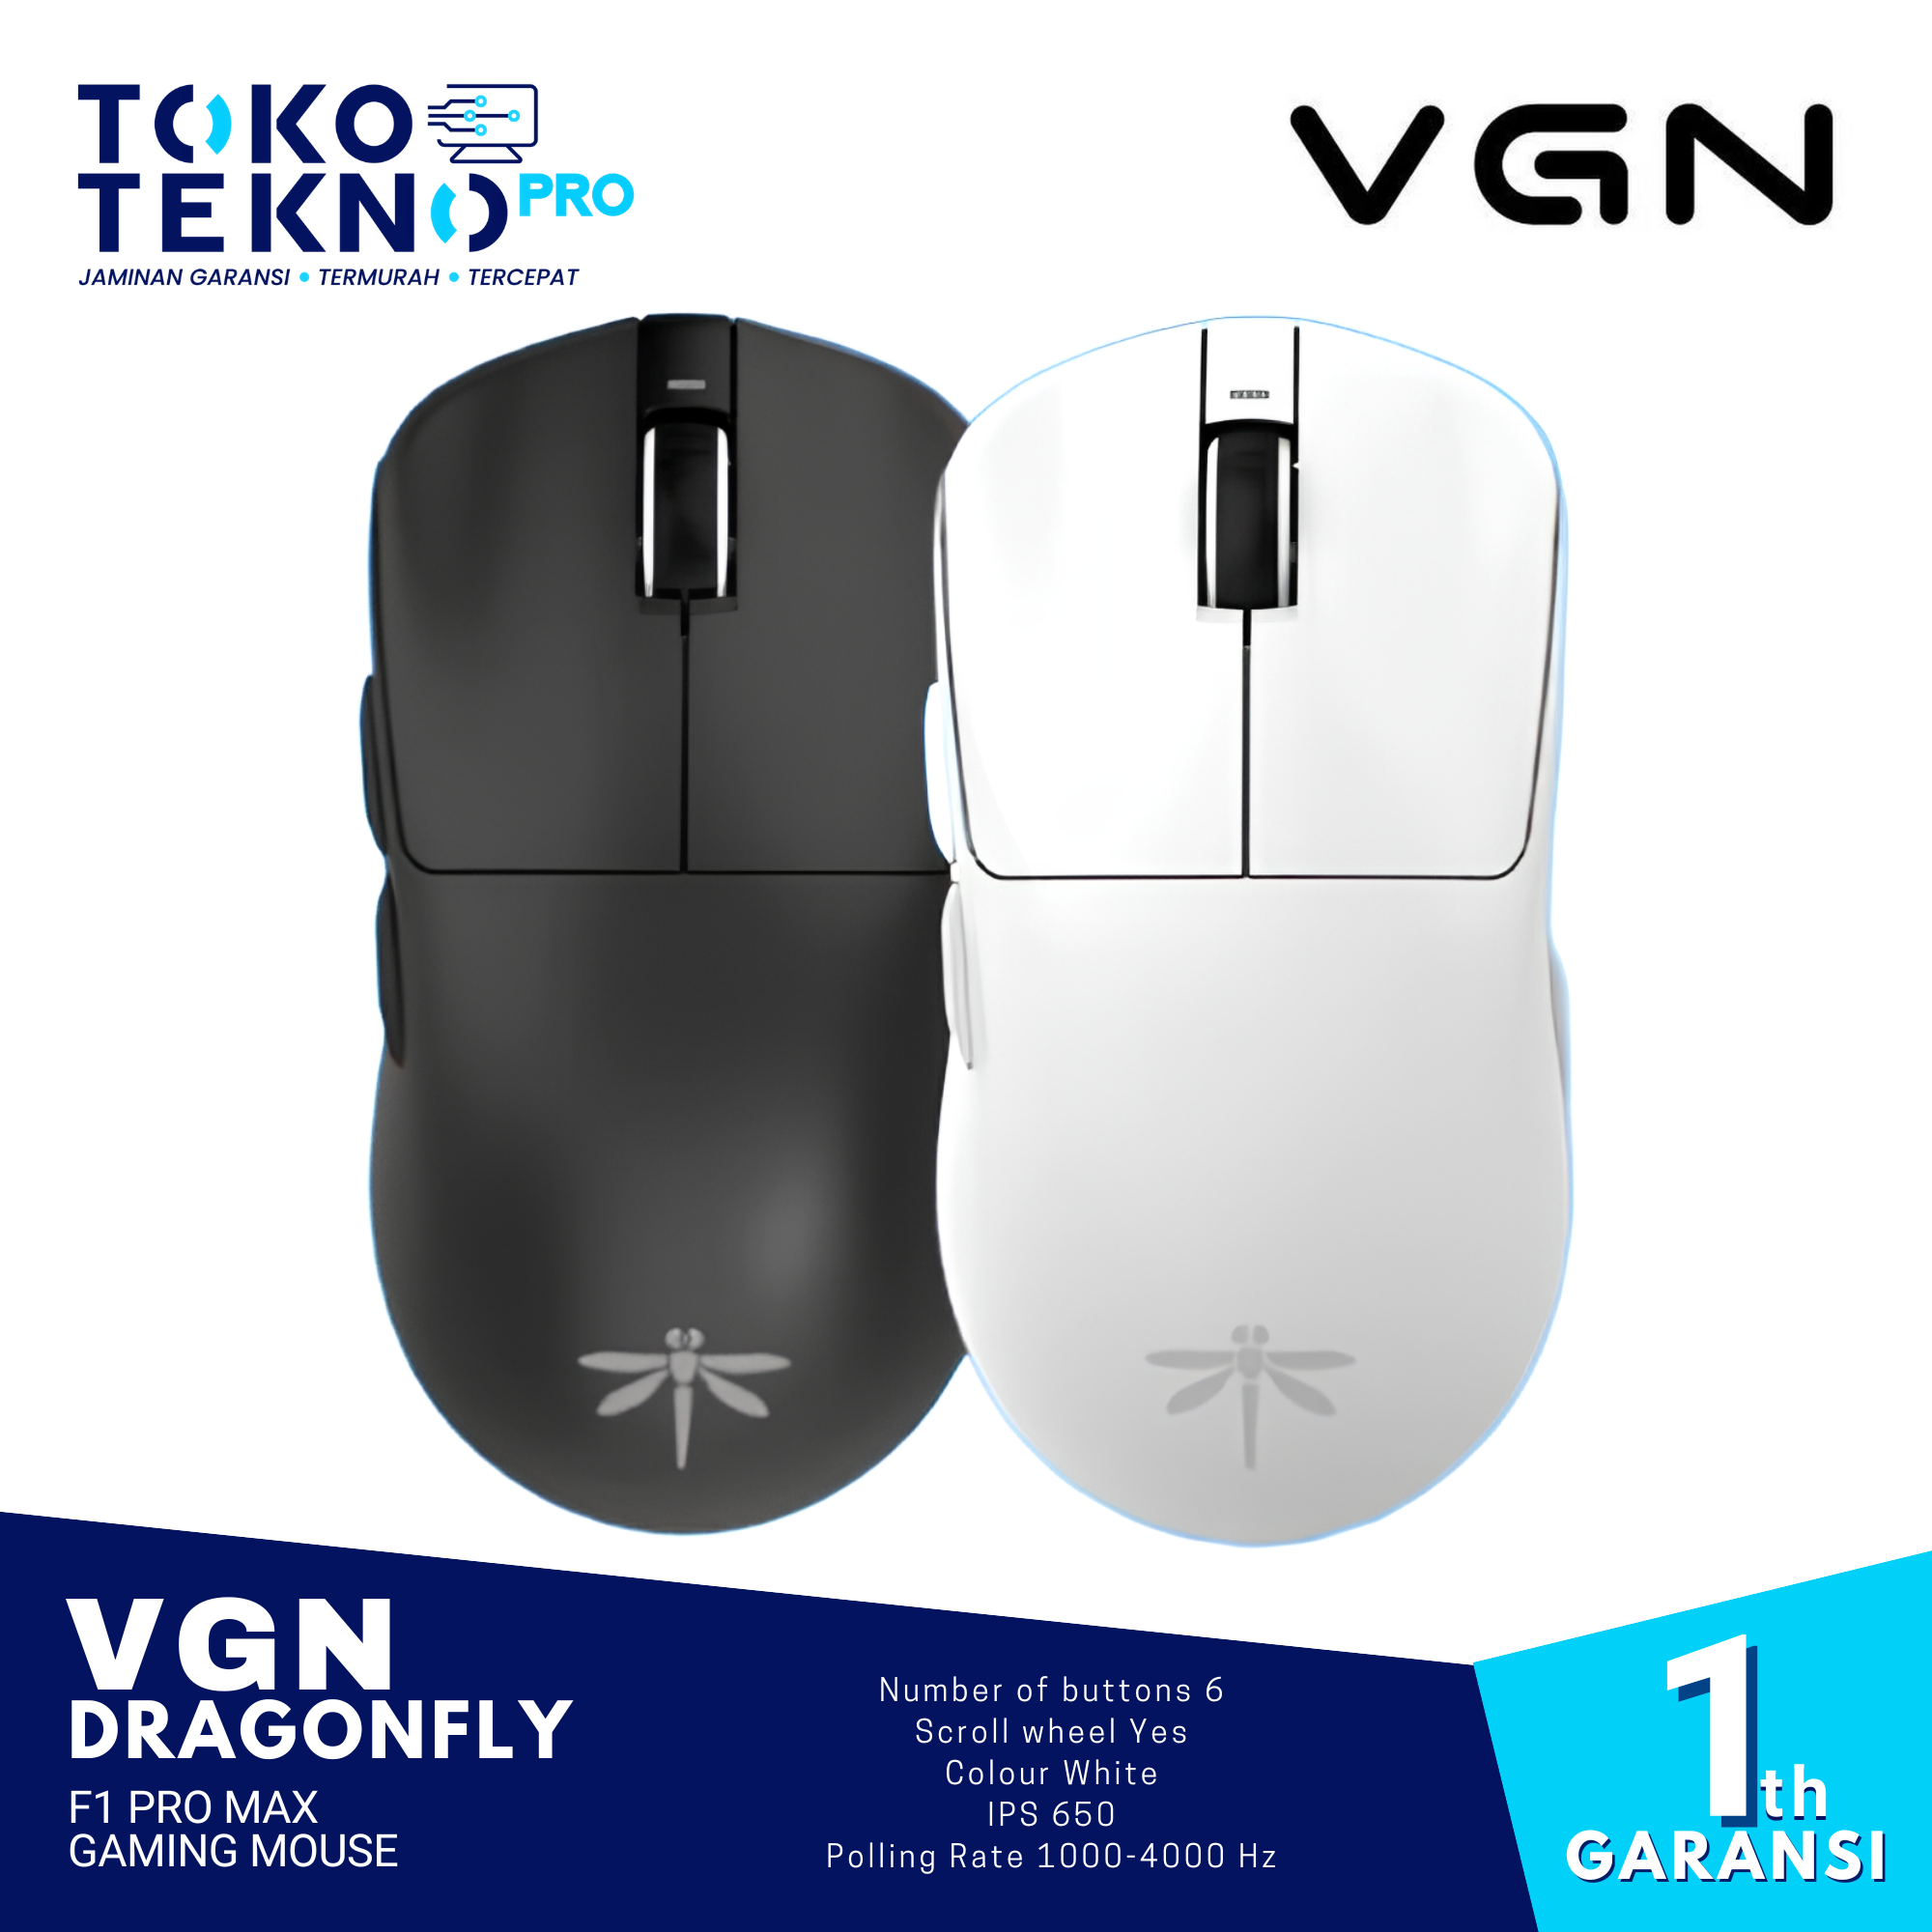 VGN Dragonfly F1 PRO MAX